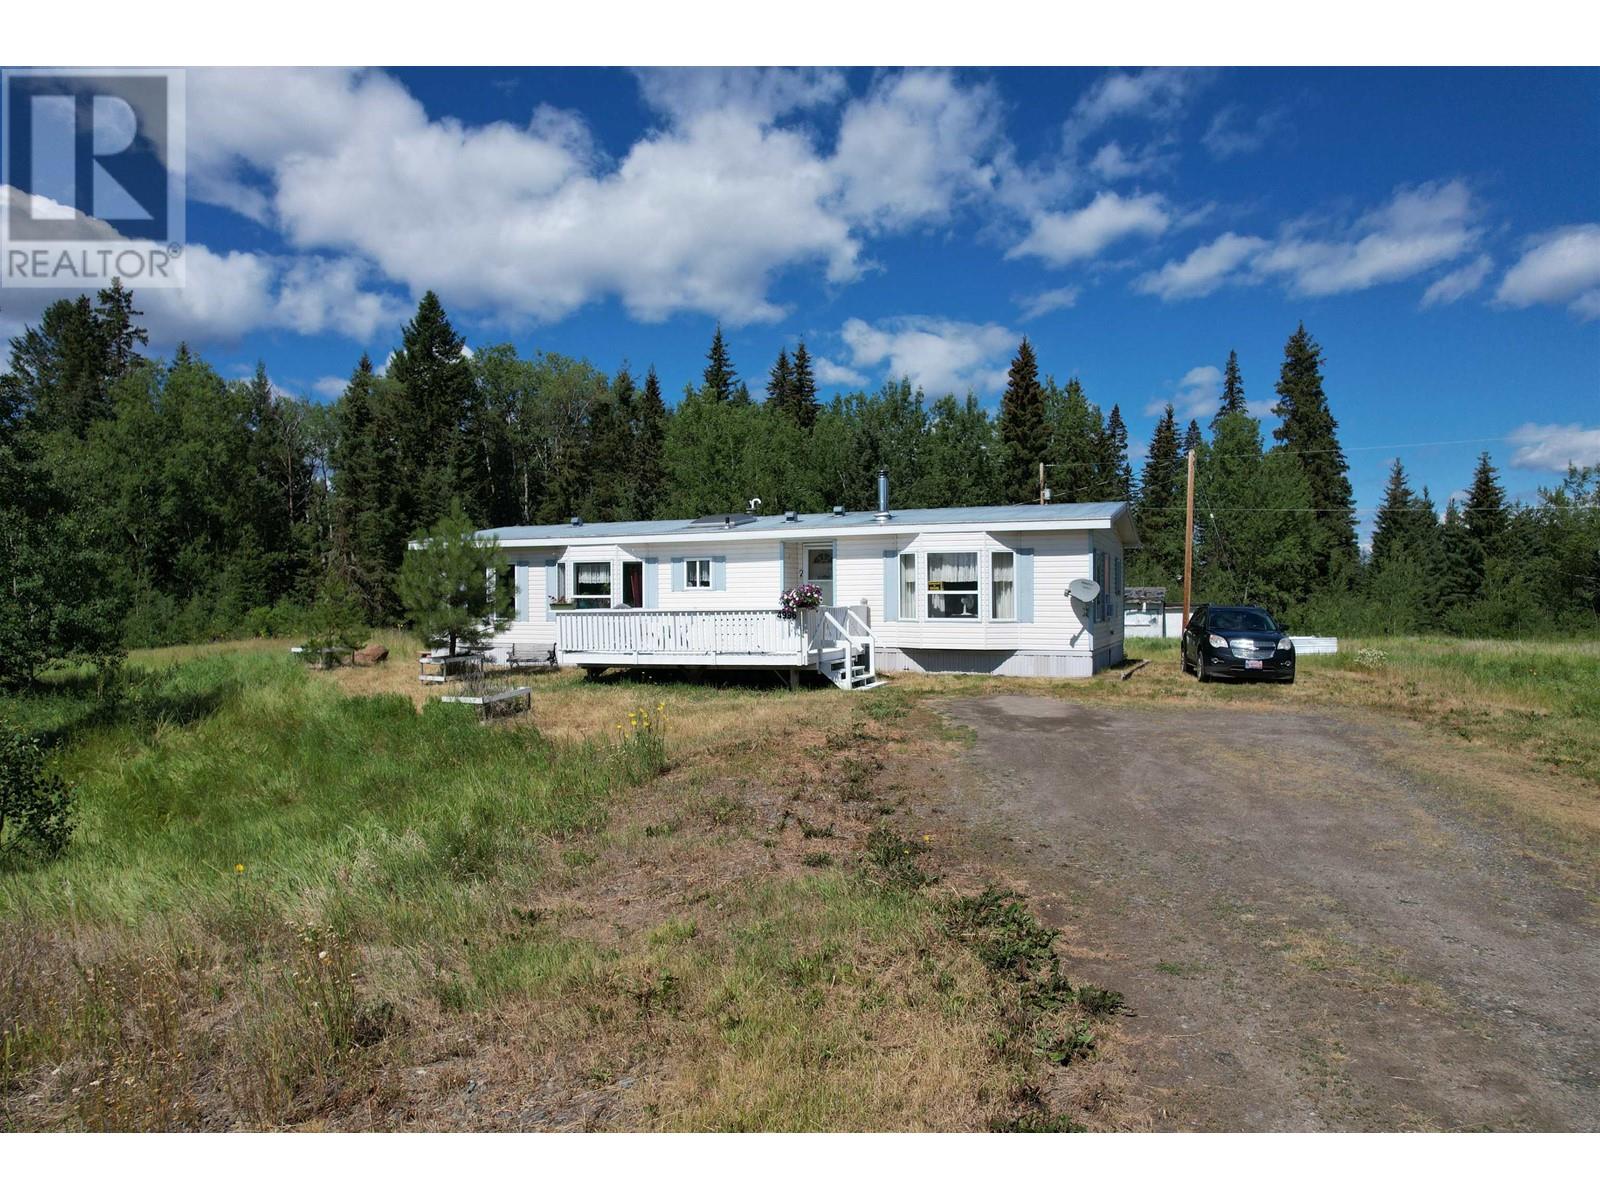 4996 LILY PAD LAKE ROAD located in 100 Mile House, British Columbia